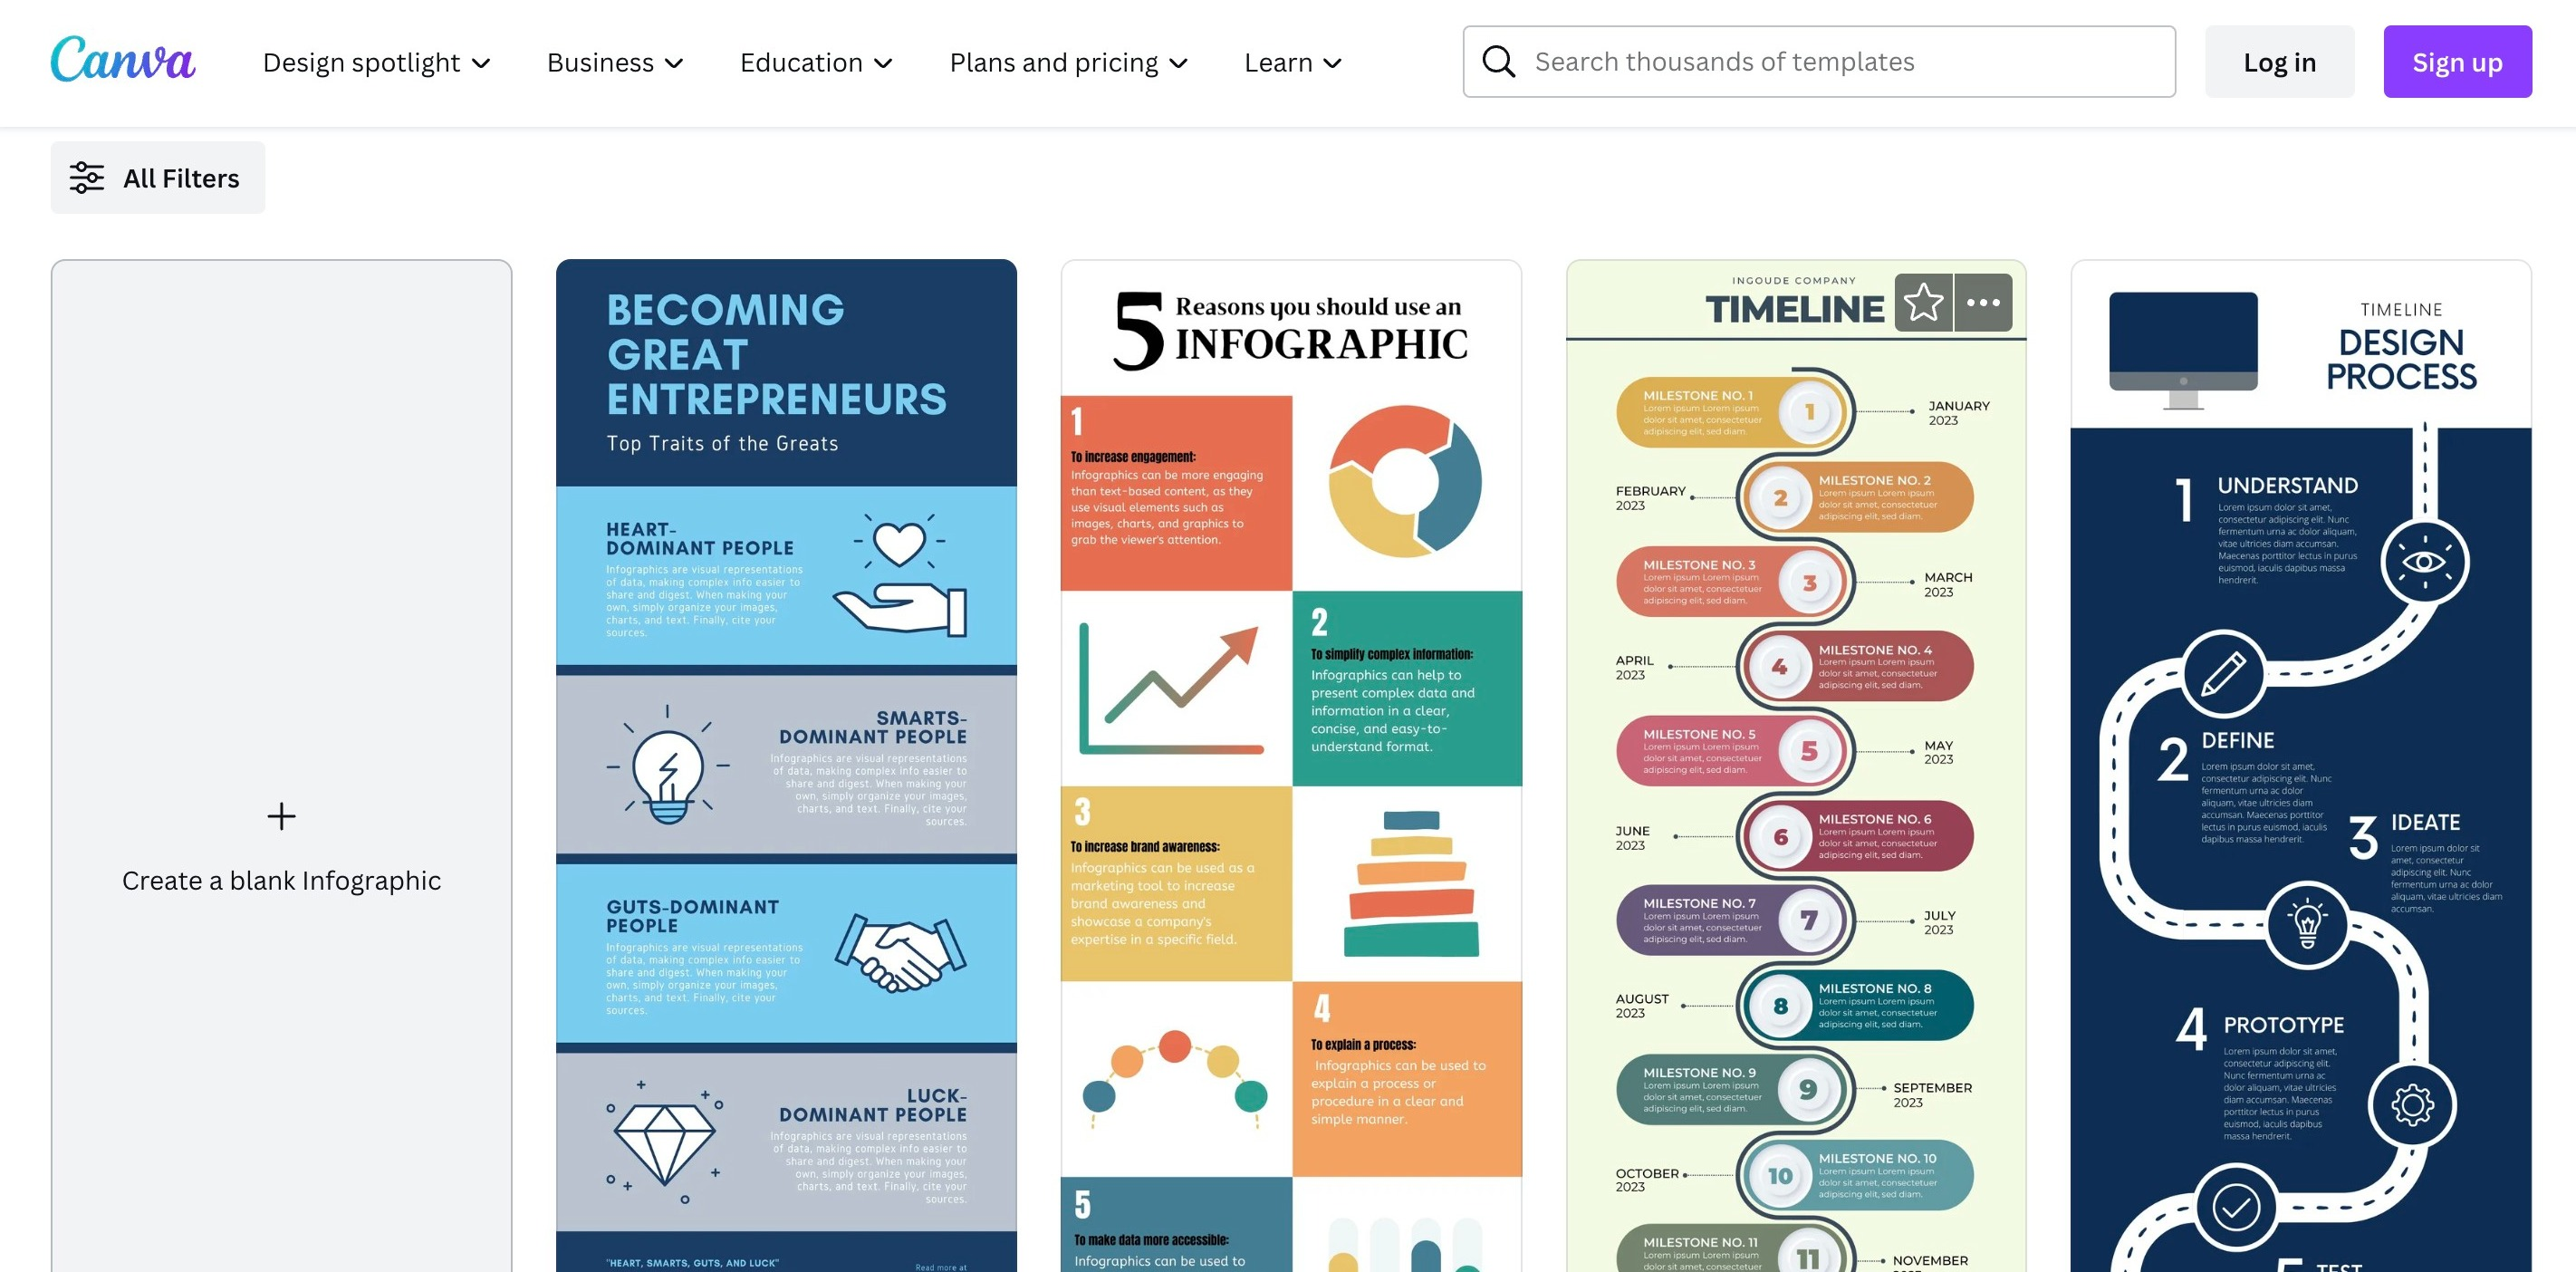 Screenshot of Canva showing how to use infographics as an important off page SEO technique